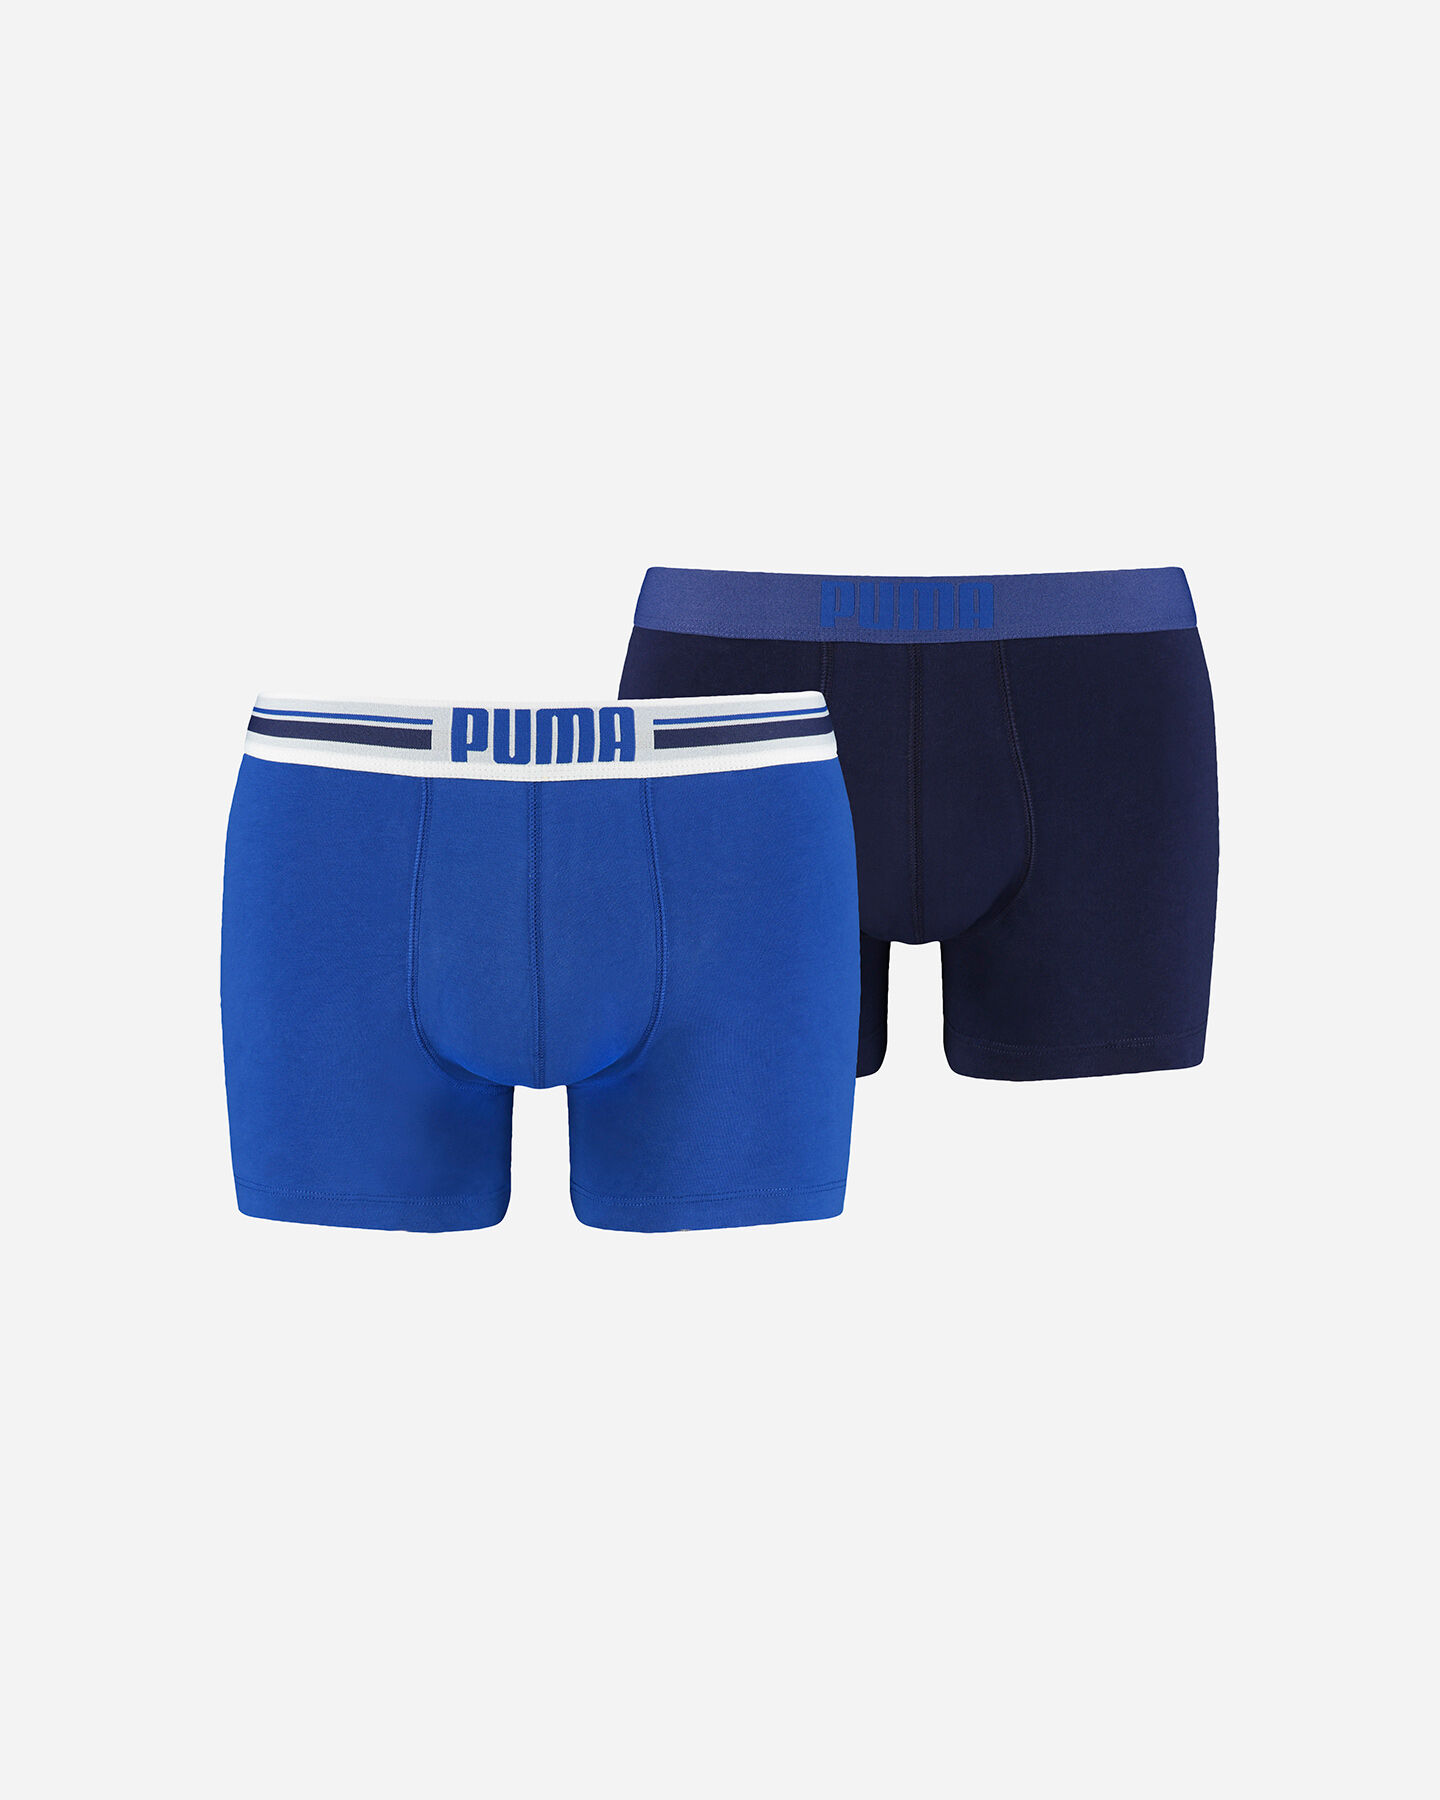  Intimo PUMA PLACED 2PACK M S1312531 scatto 0